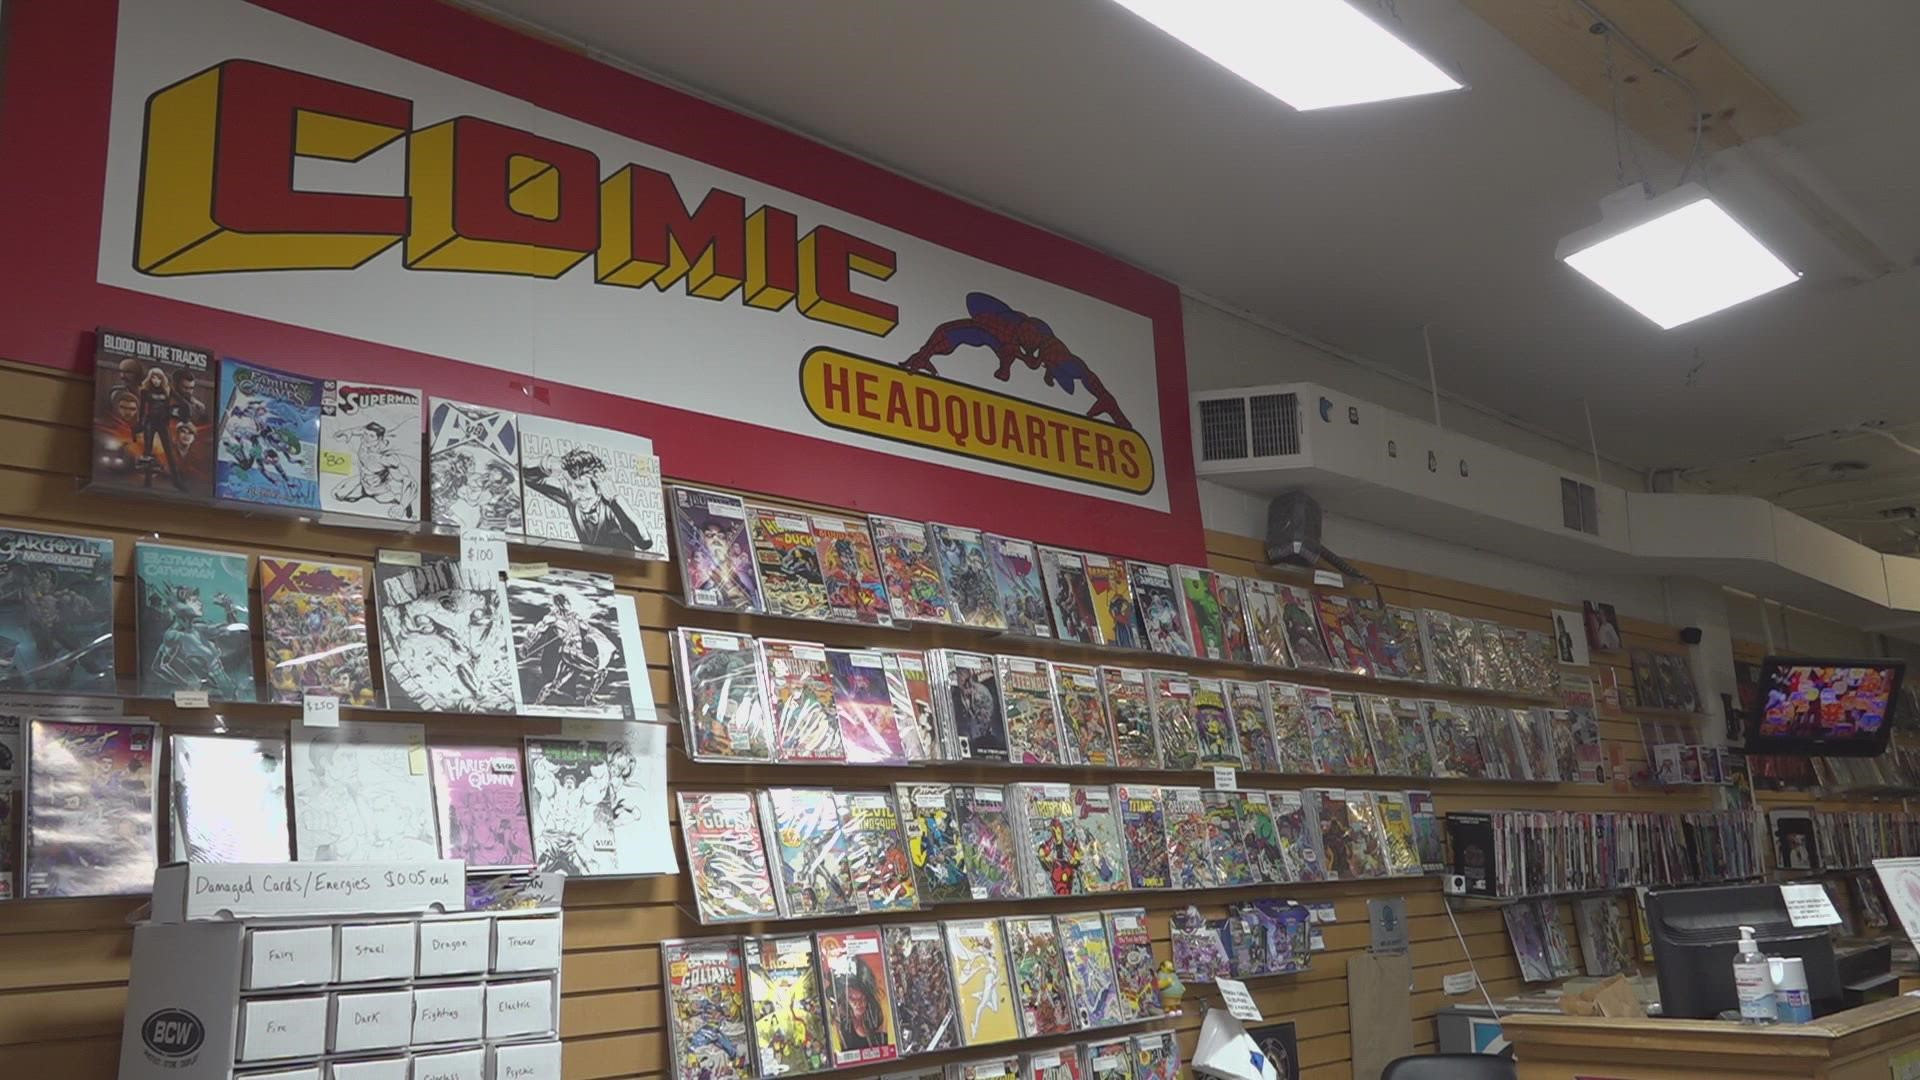 Five St. Louis area comic book stores came together to help the community heal. Proceeds from sales this weekend will go toward families and victims of the shooting.